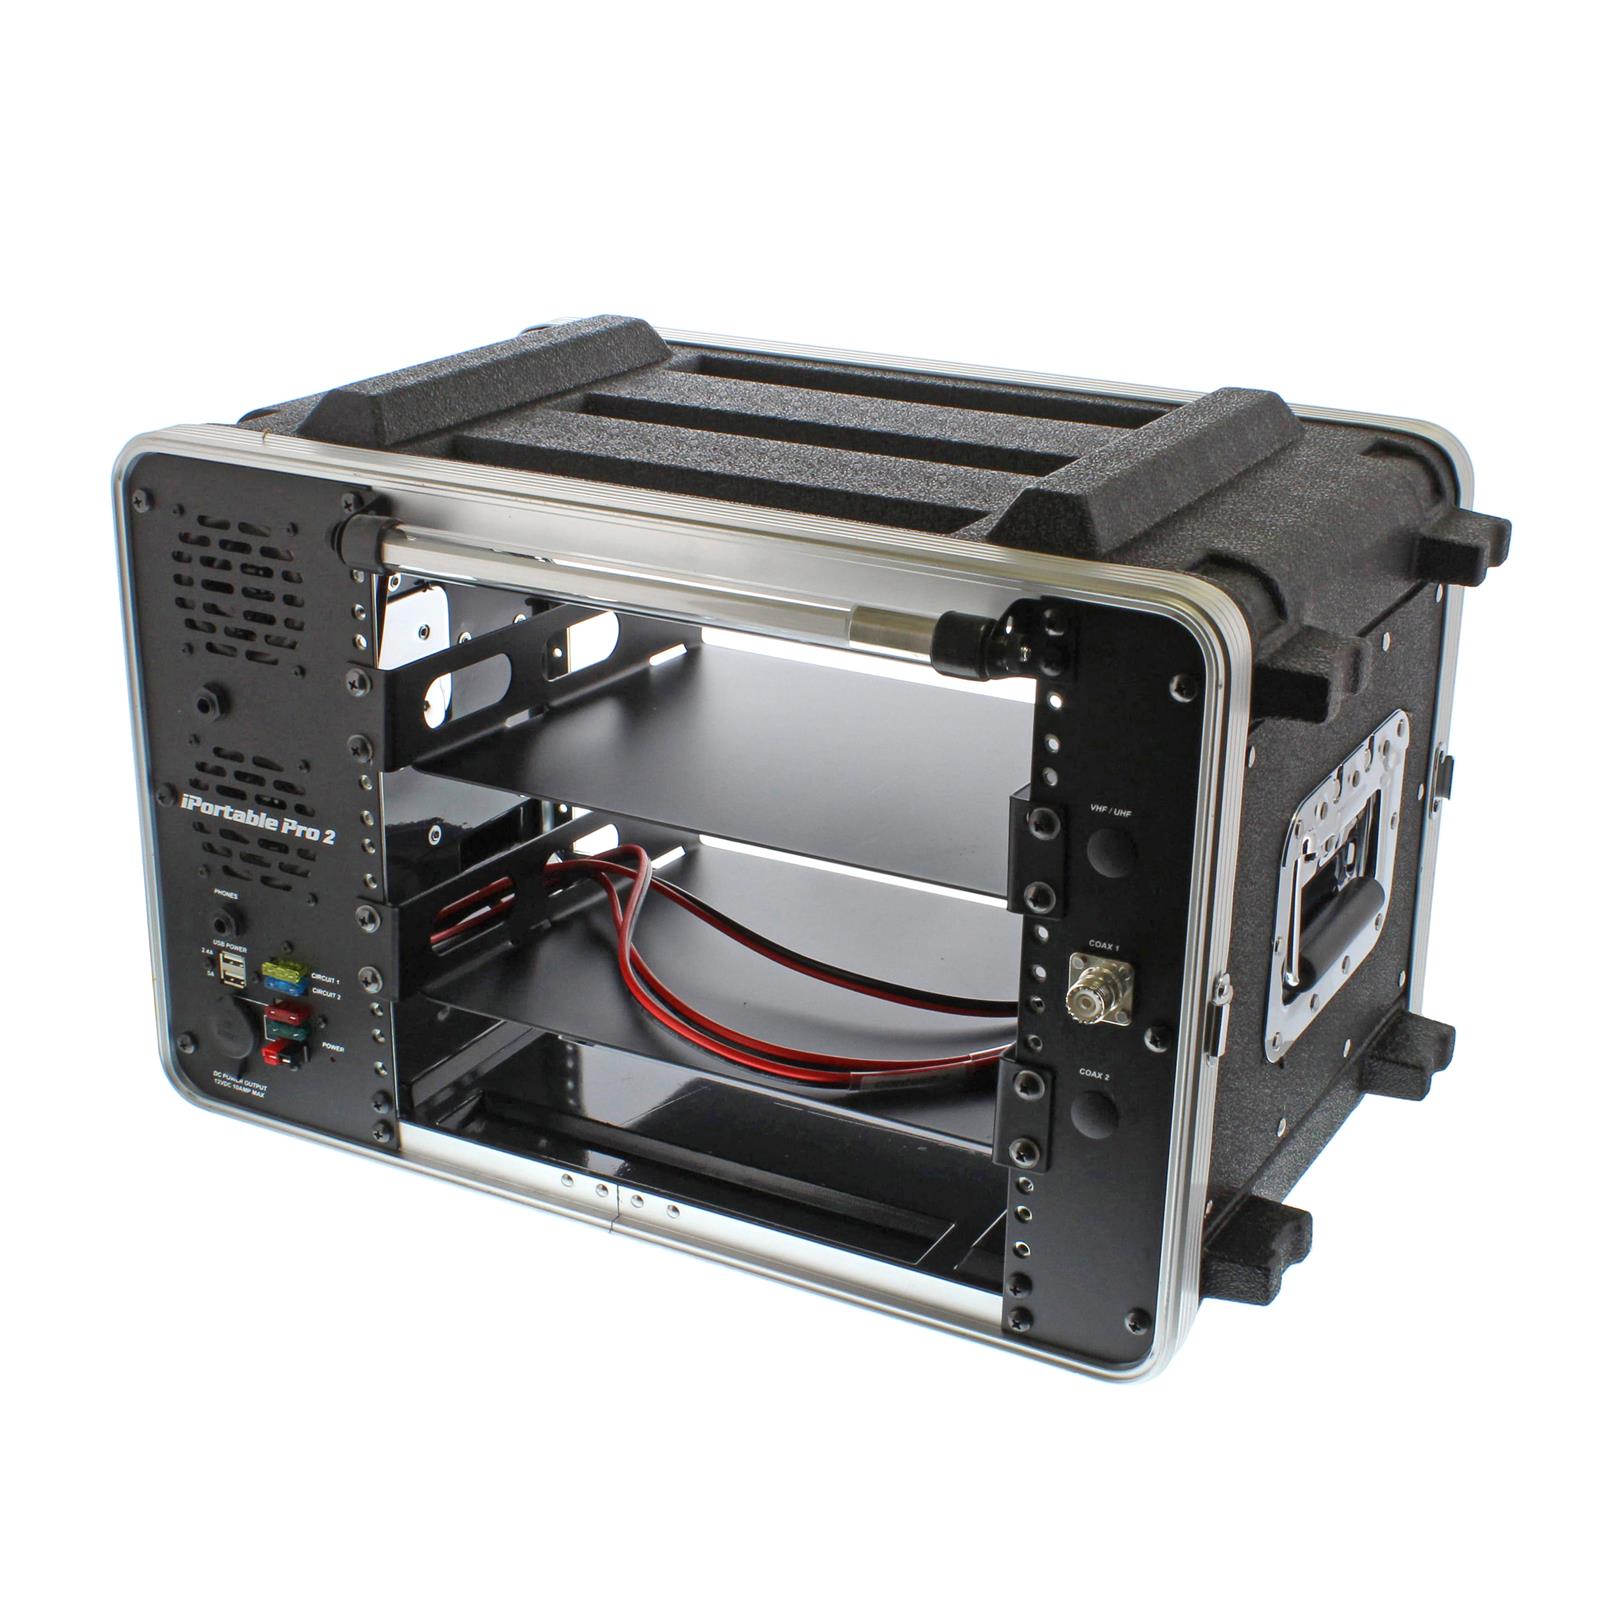 IPortable 6UM iPortable Rack | Pro2 DX Engineering Equipment Systems